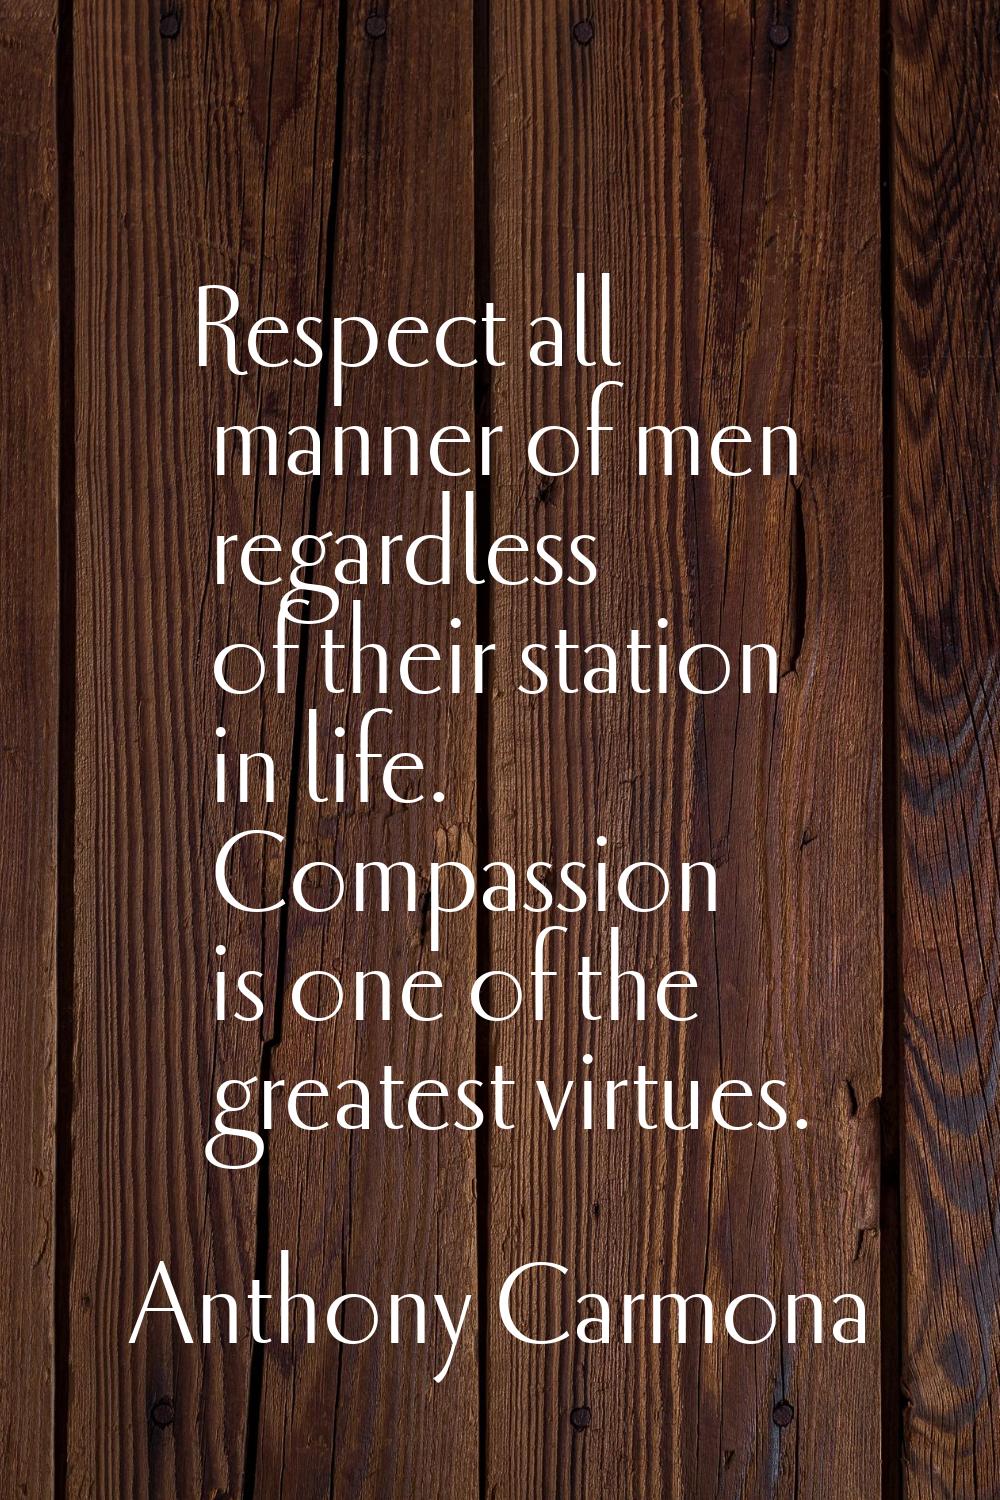 Respect all manner of men regardless of their station in life. Compassion is one of the greatest vi